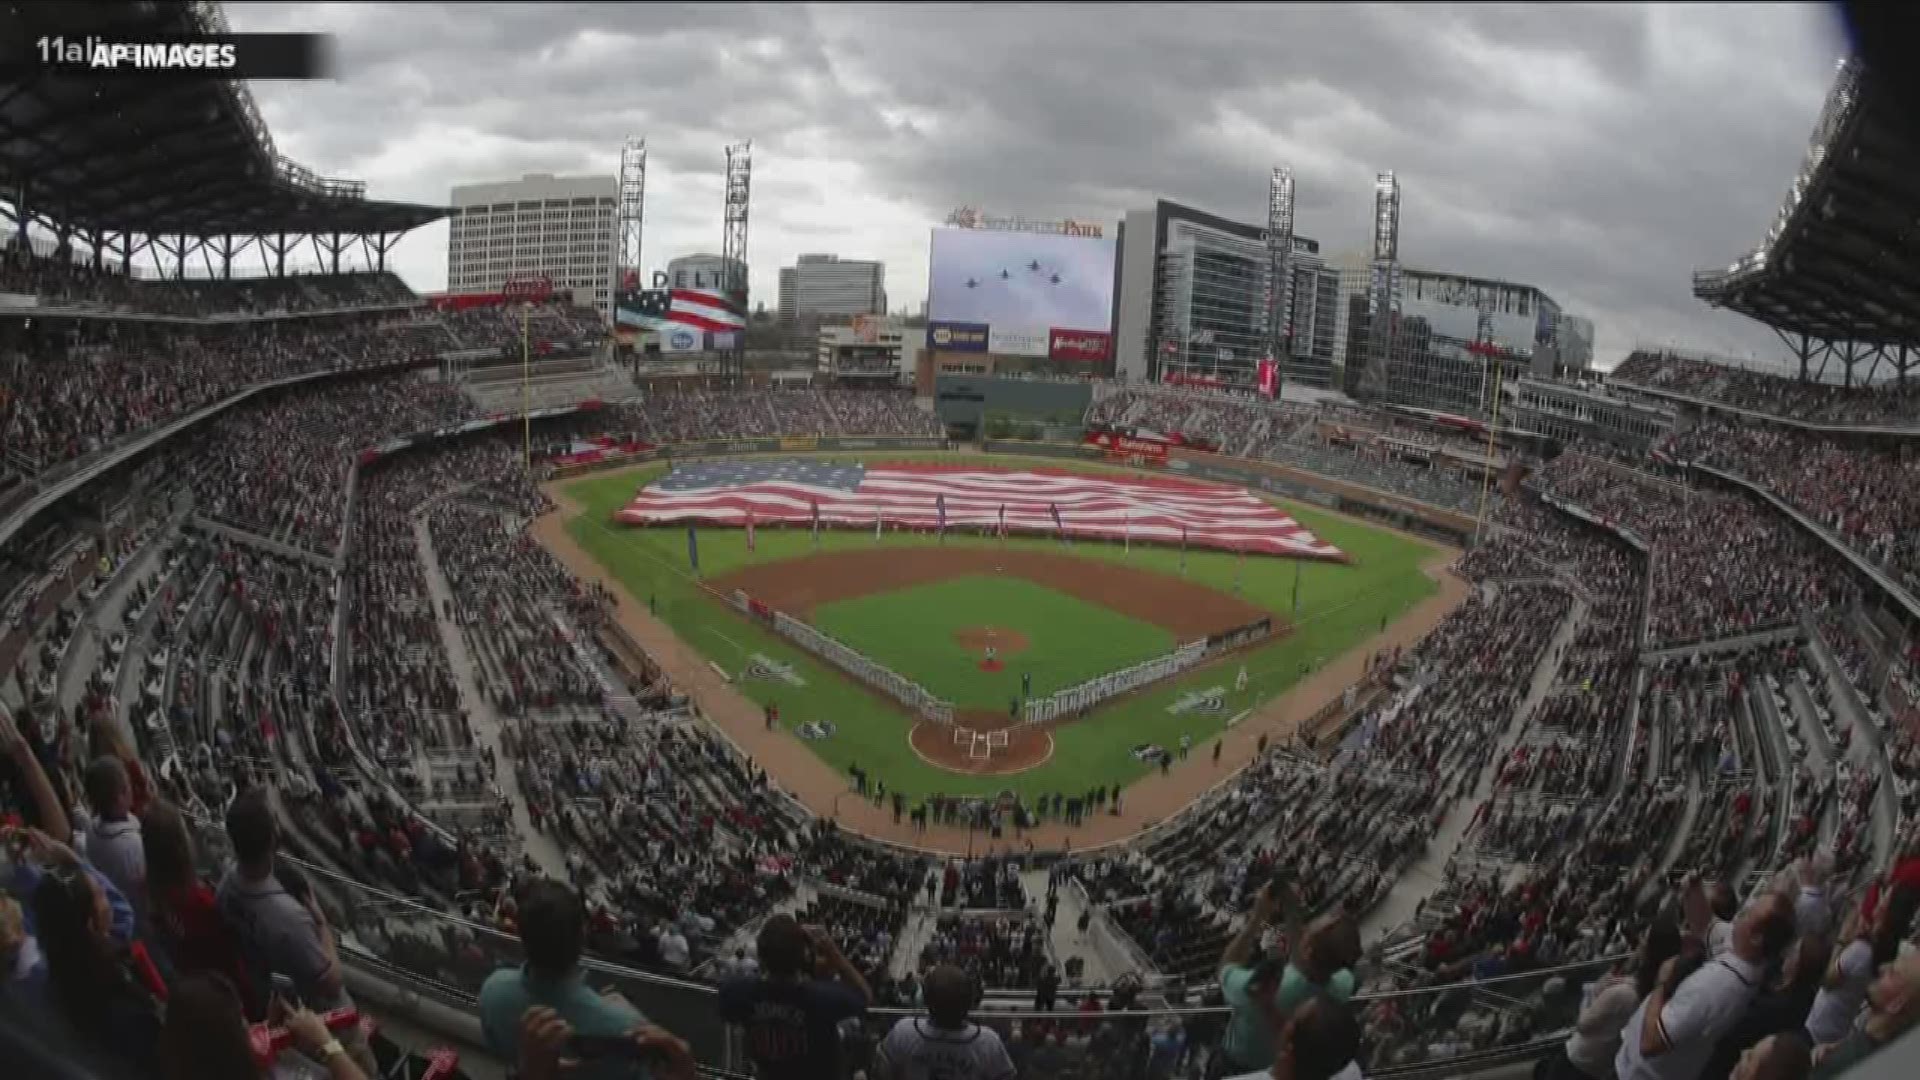 The Atlanta Braves are joining Astros, Nationals, White Sox, others in extending netting.